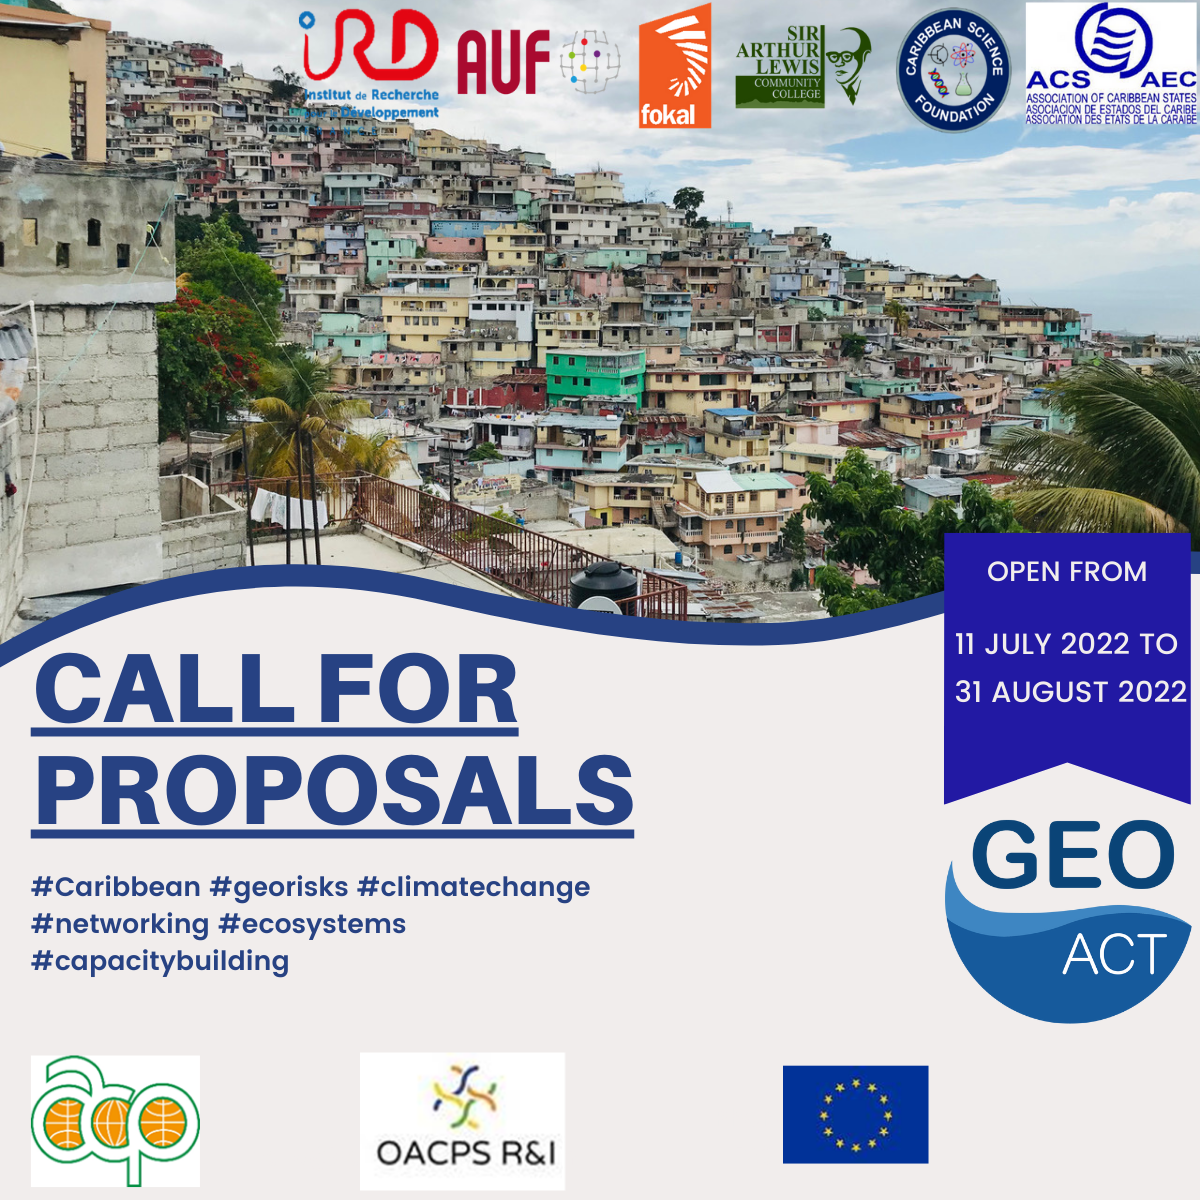 GEOACT has launched two calls for proposals to build climate resilience in the Caribbean